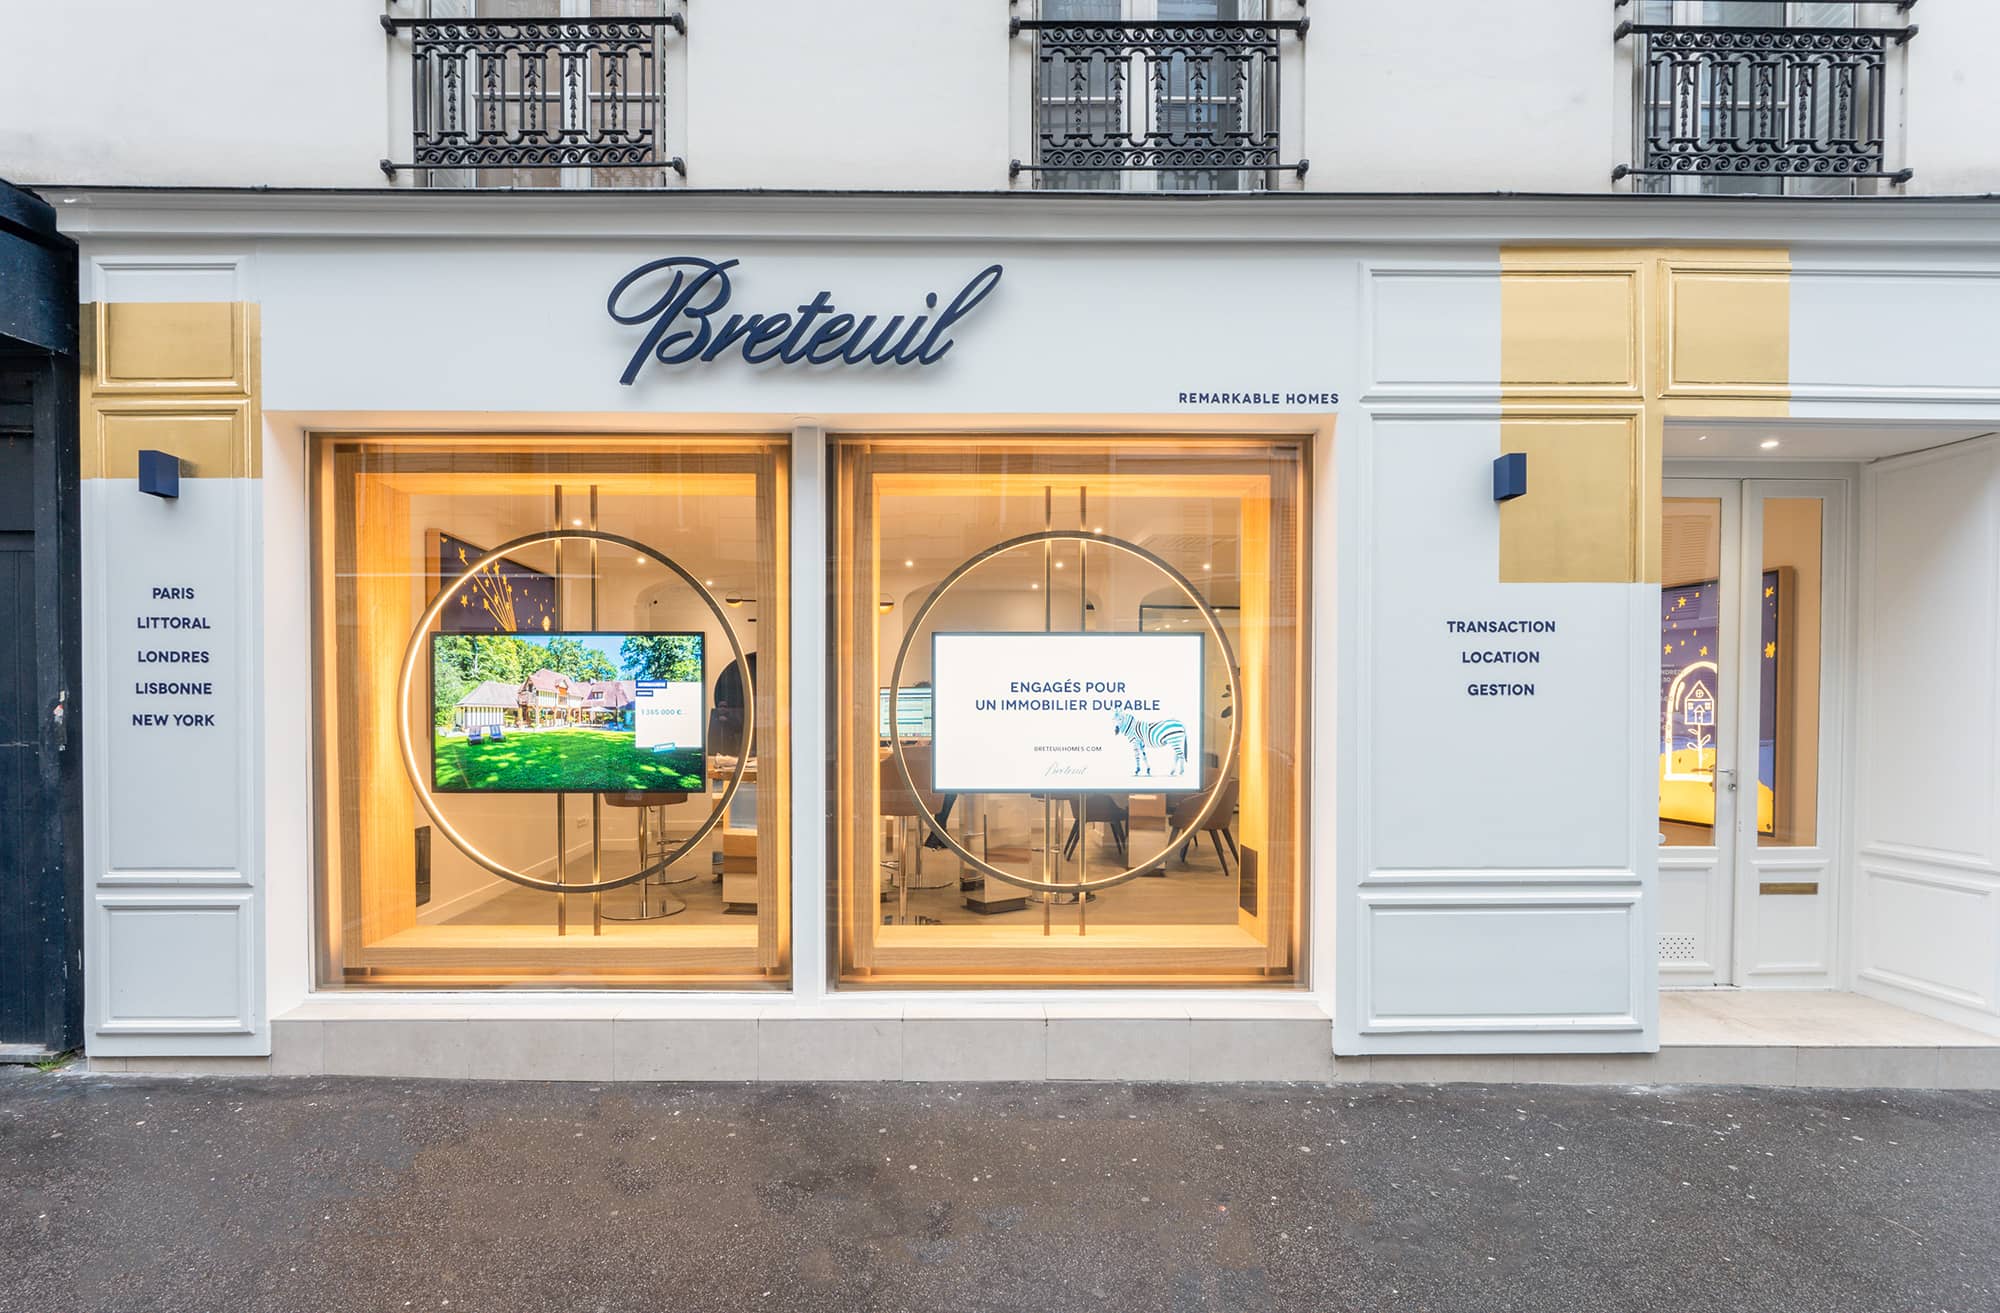 Breteuil Immobilier